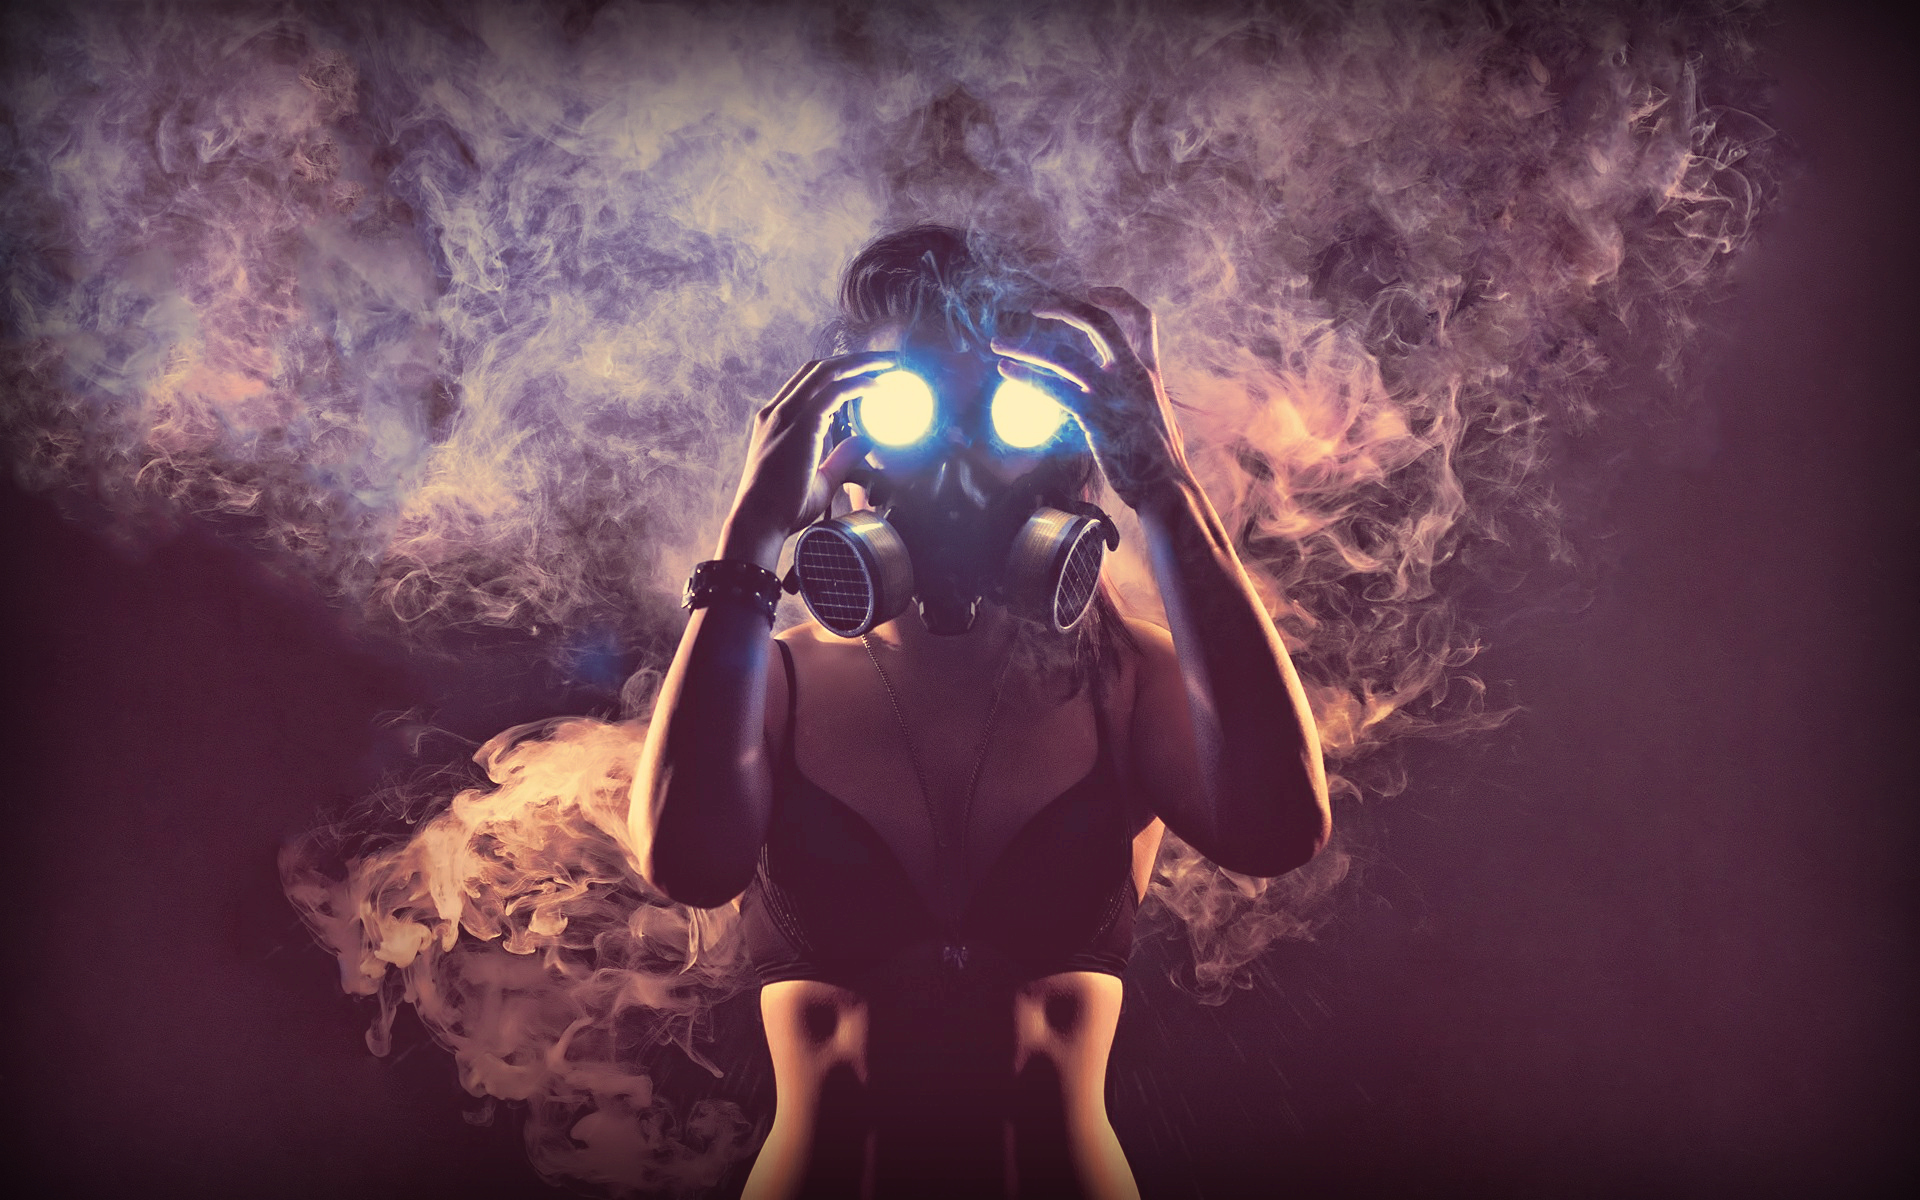 Download the Glowing Eyes Gas Mask Wallpaper, Glowing Eyes Gas Mask